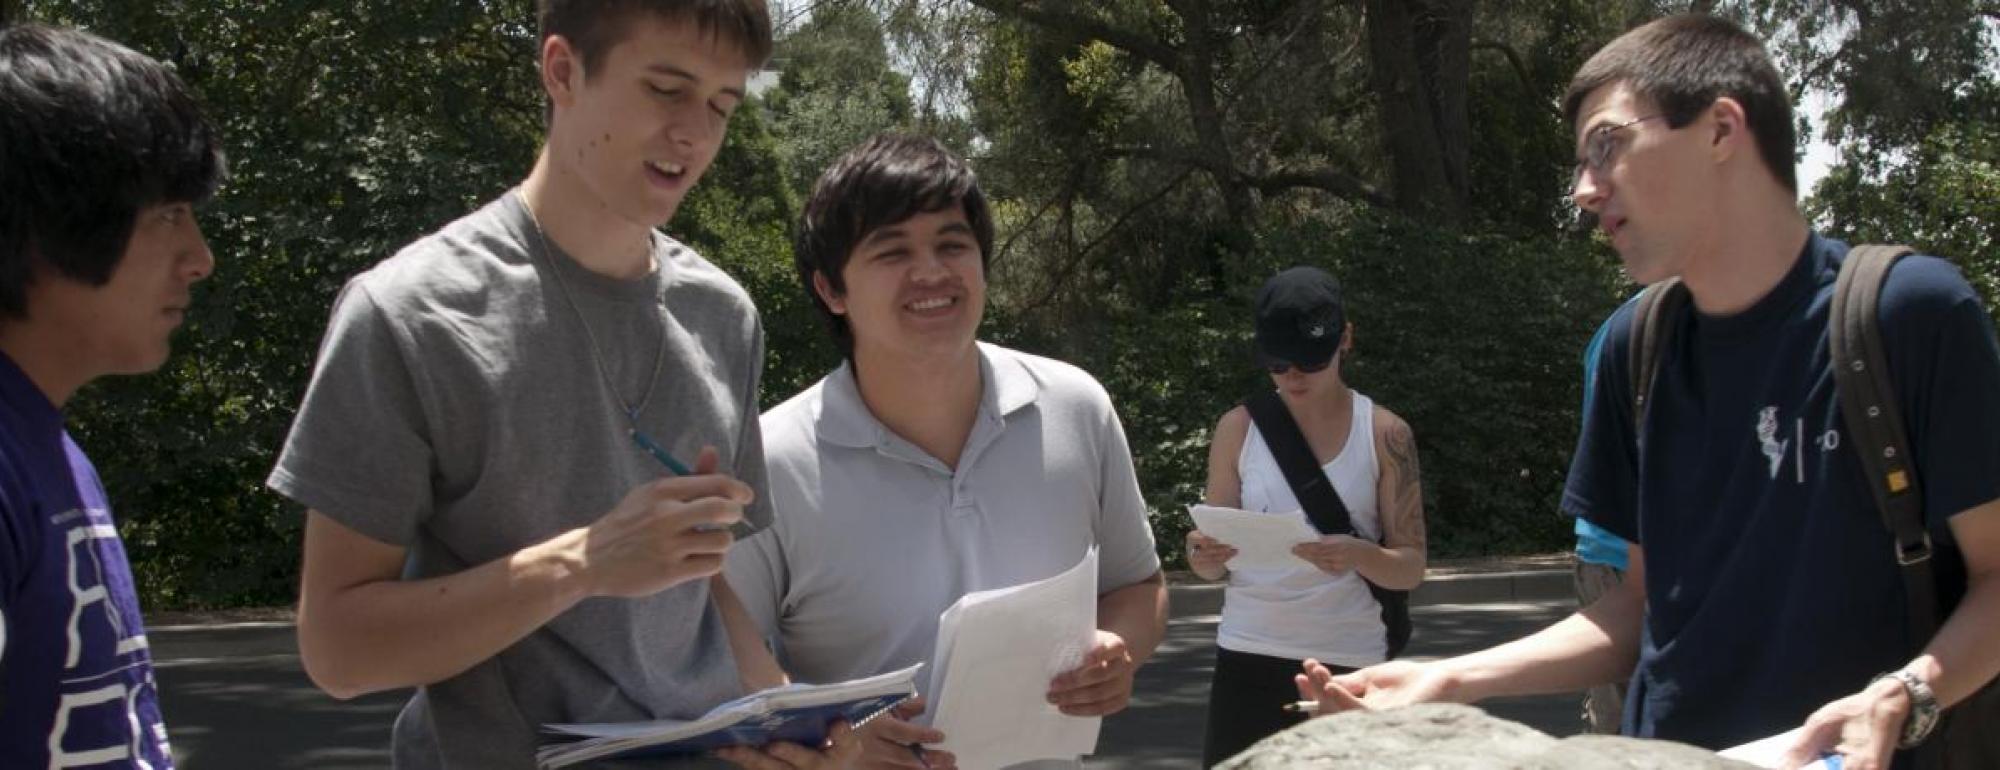 uc davis students talk and hold papers in a group